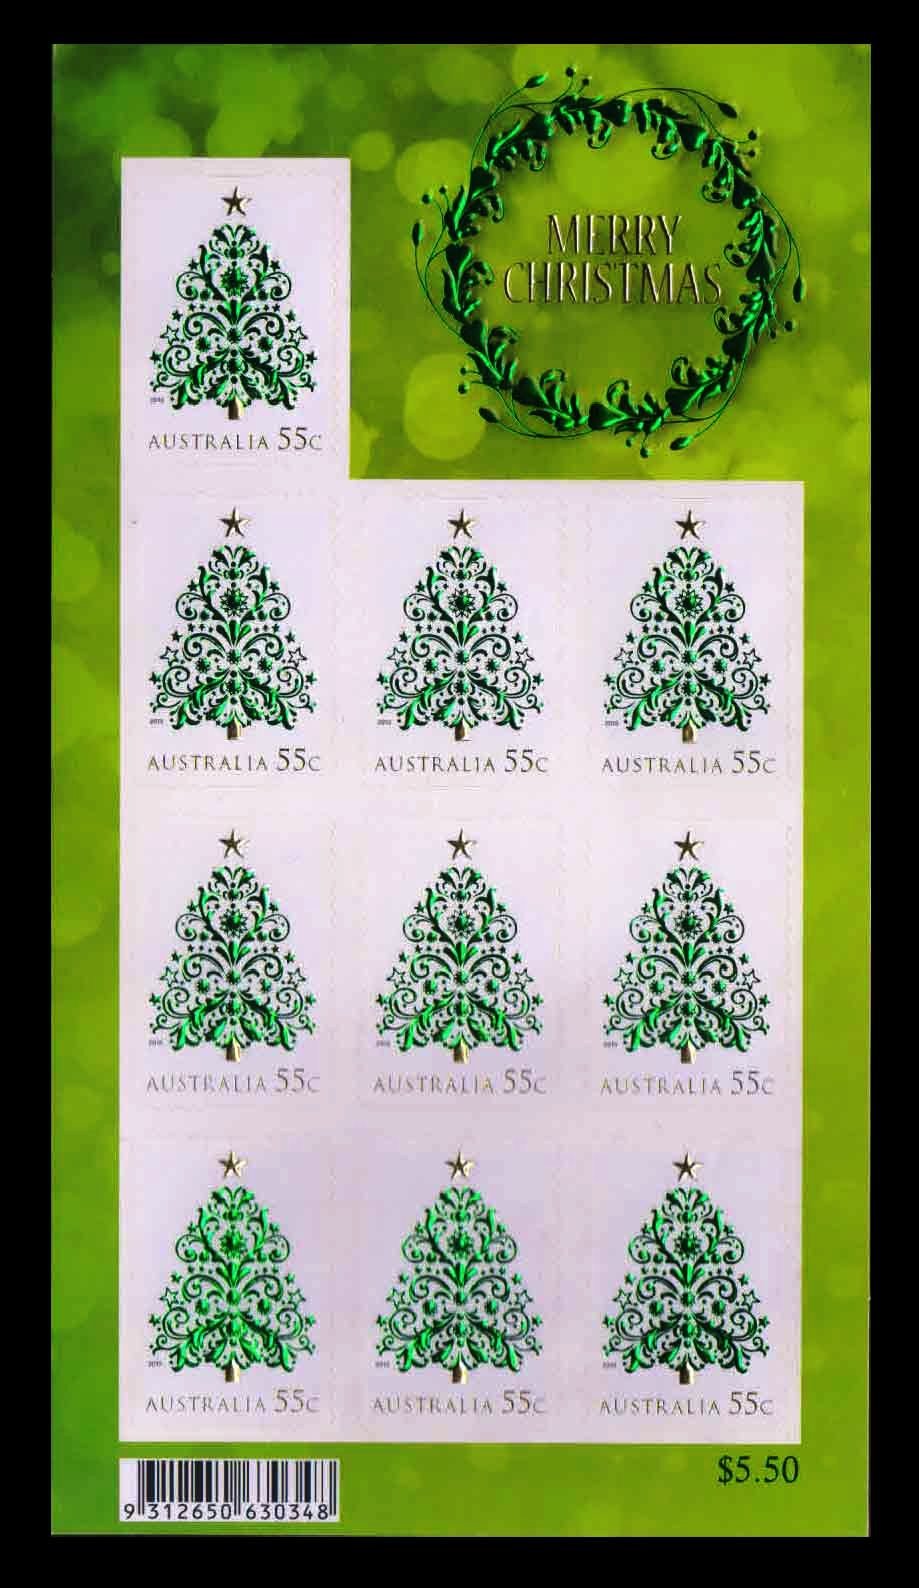 AUSTRALIA 2013 - Christmas Tree, Gold and Green Foiled Stamps, Sheet of 10 Stamps, MNH, S.G. 4090